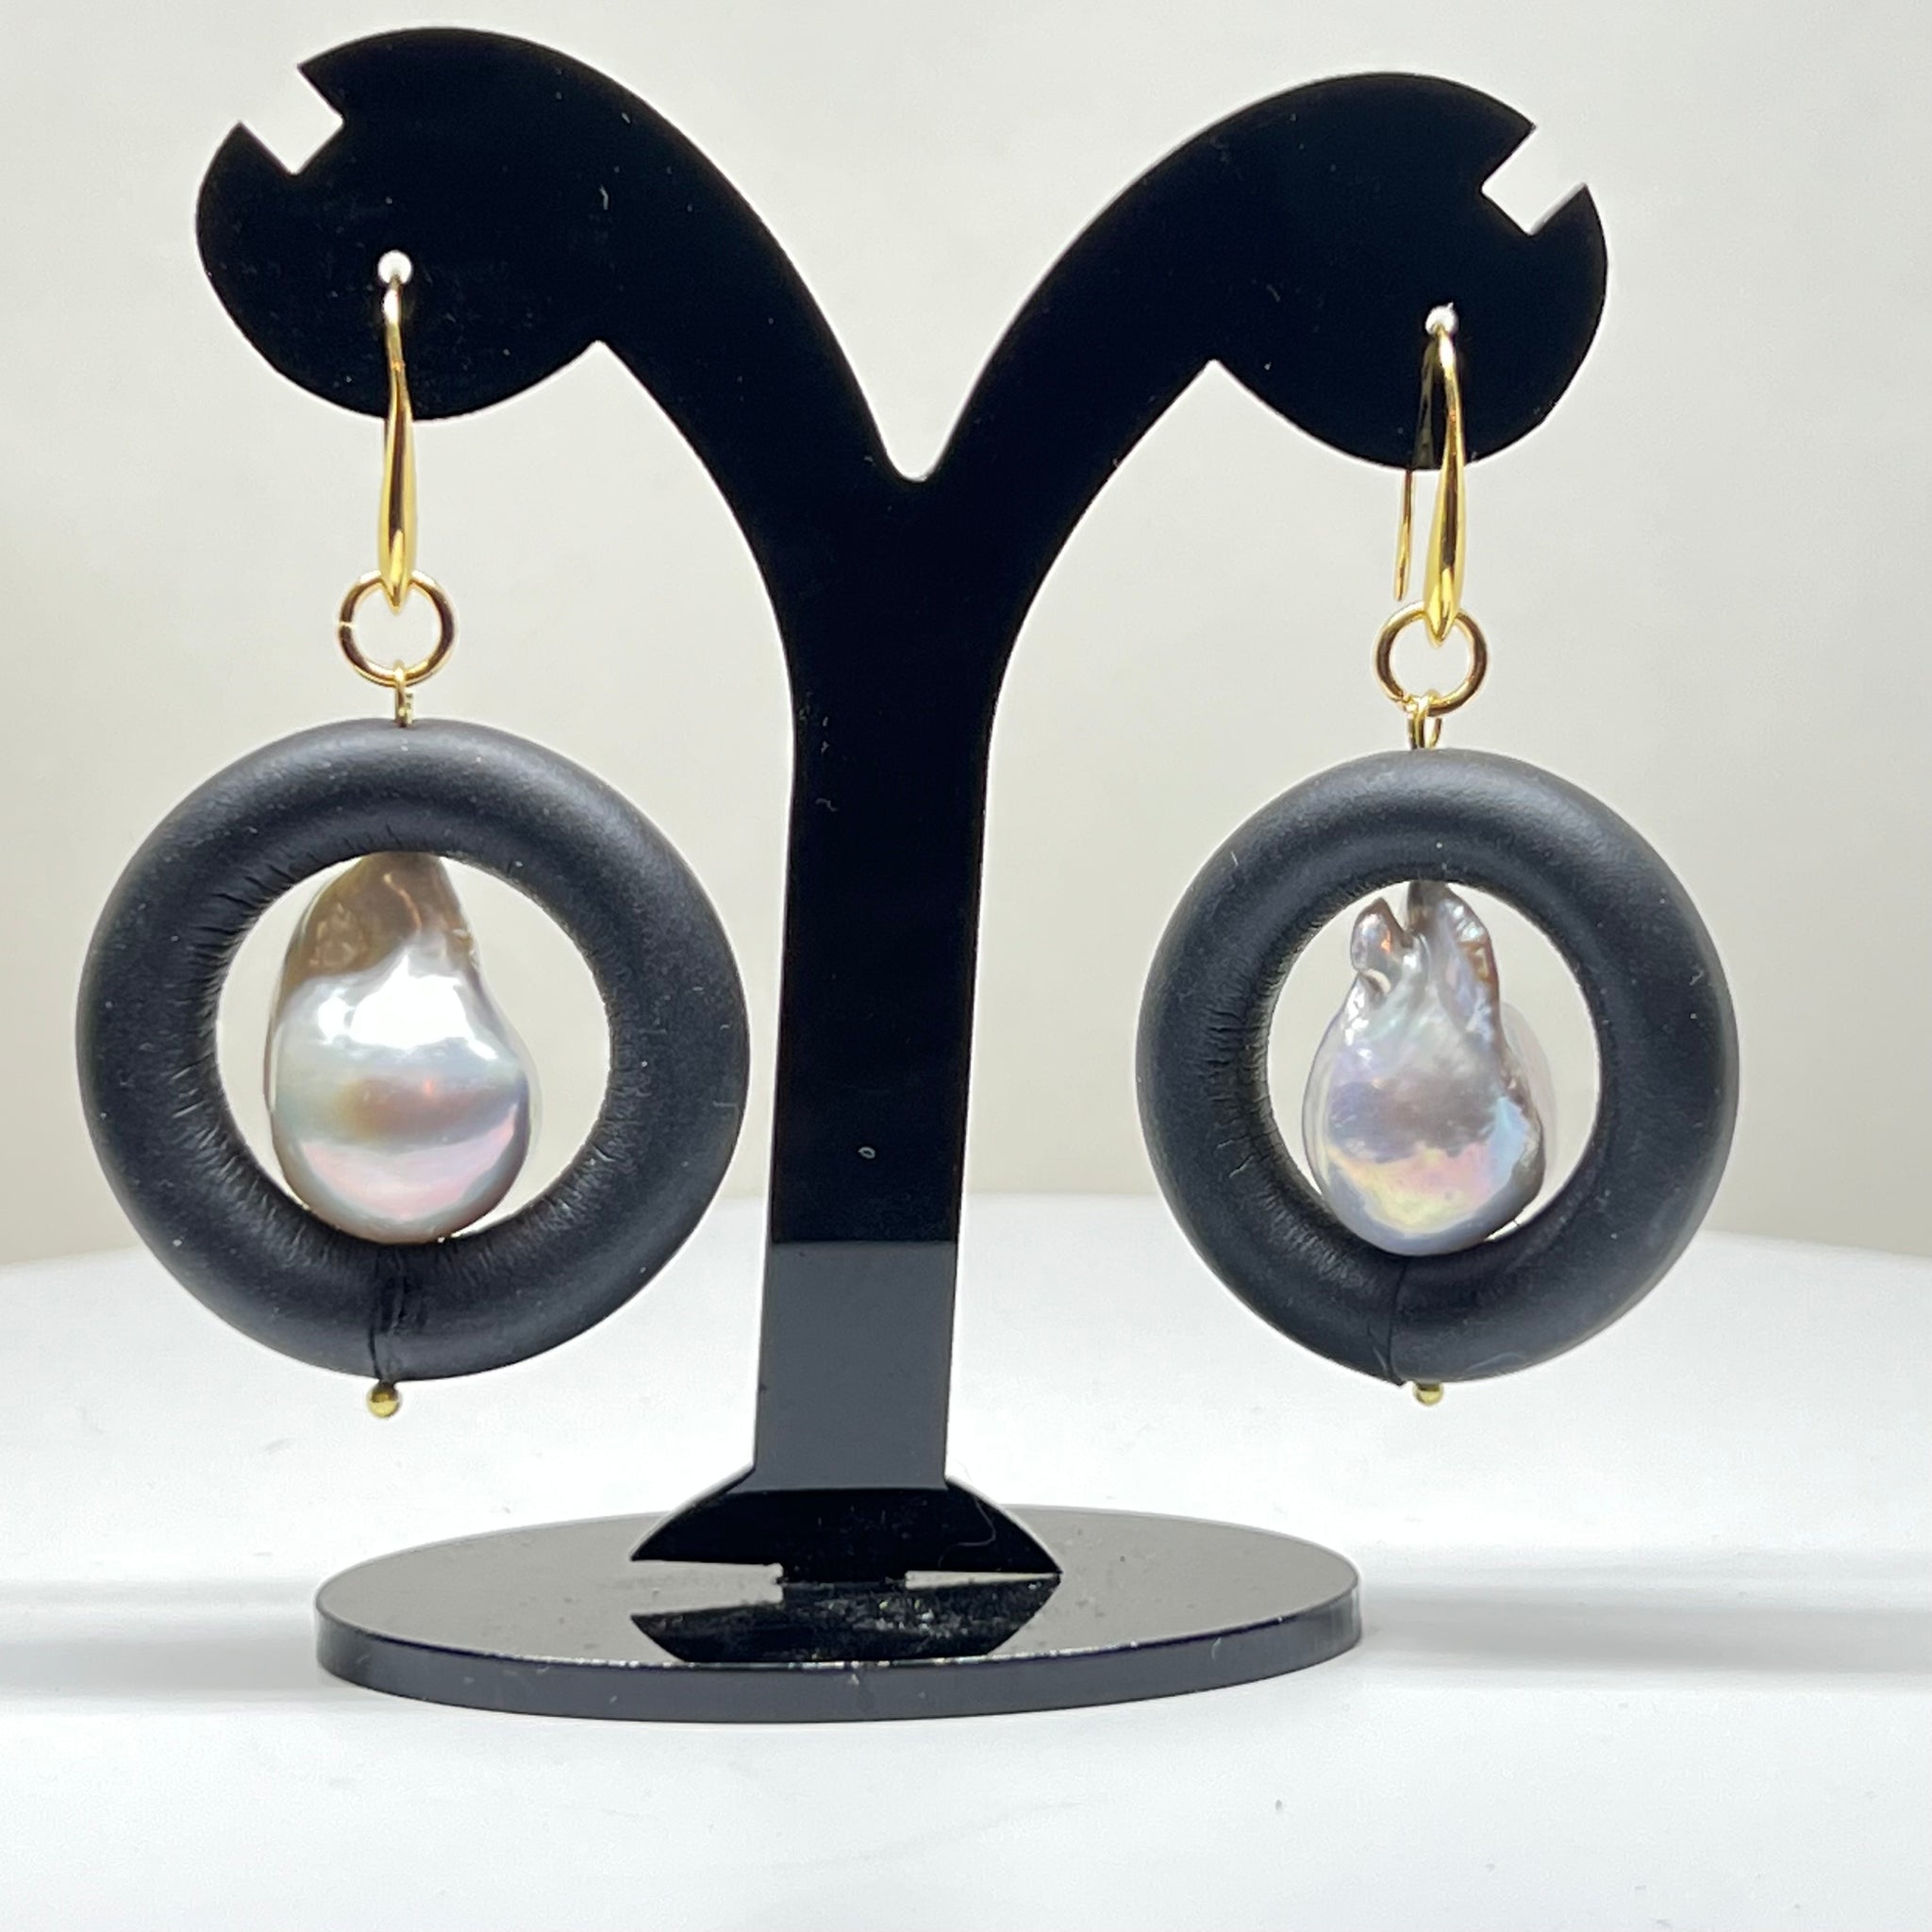 BLACK RUBBER EARRINGS WITH GENUINE BAROQUE PEARLS AND GOLD ENDCAPS. by nyet jewelry